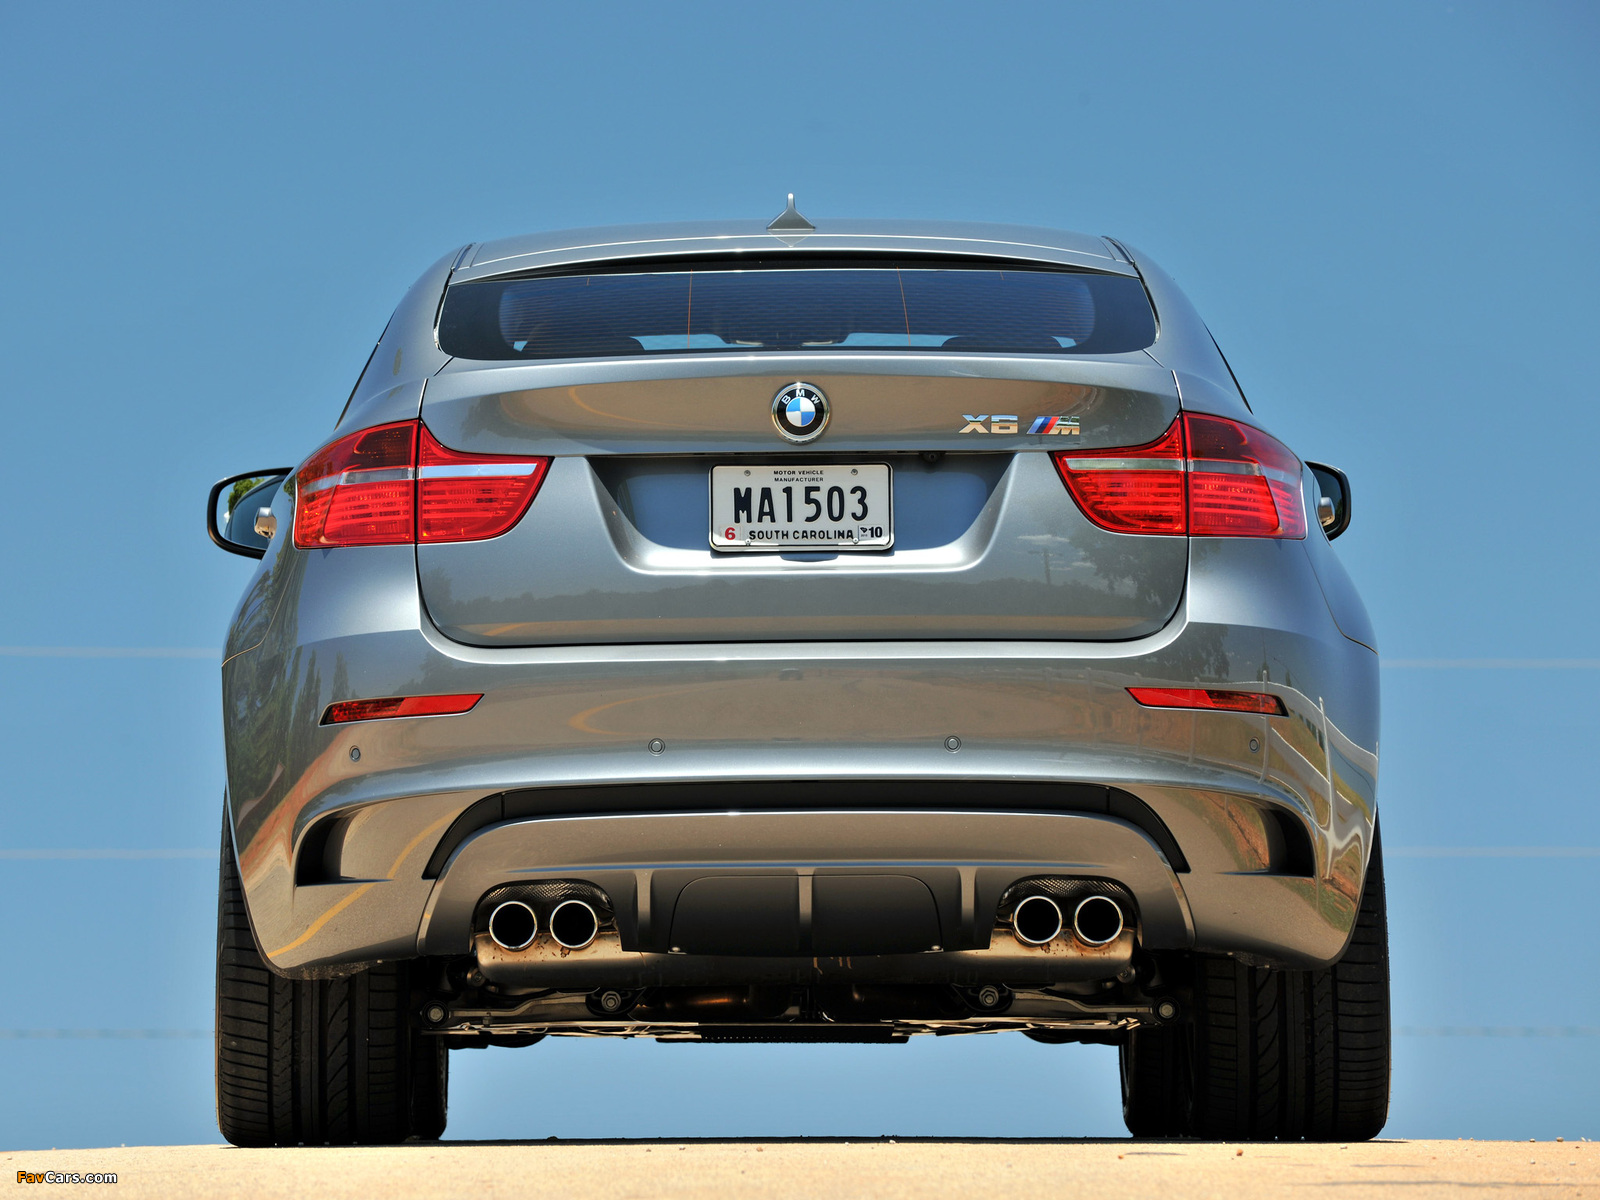 BMW X6 M (E71) 2009 pictures (1600 x 1200)